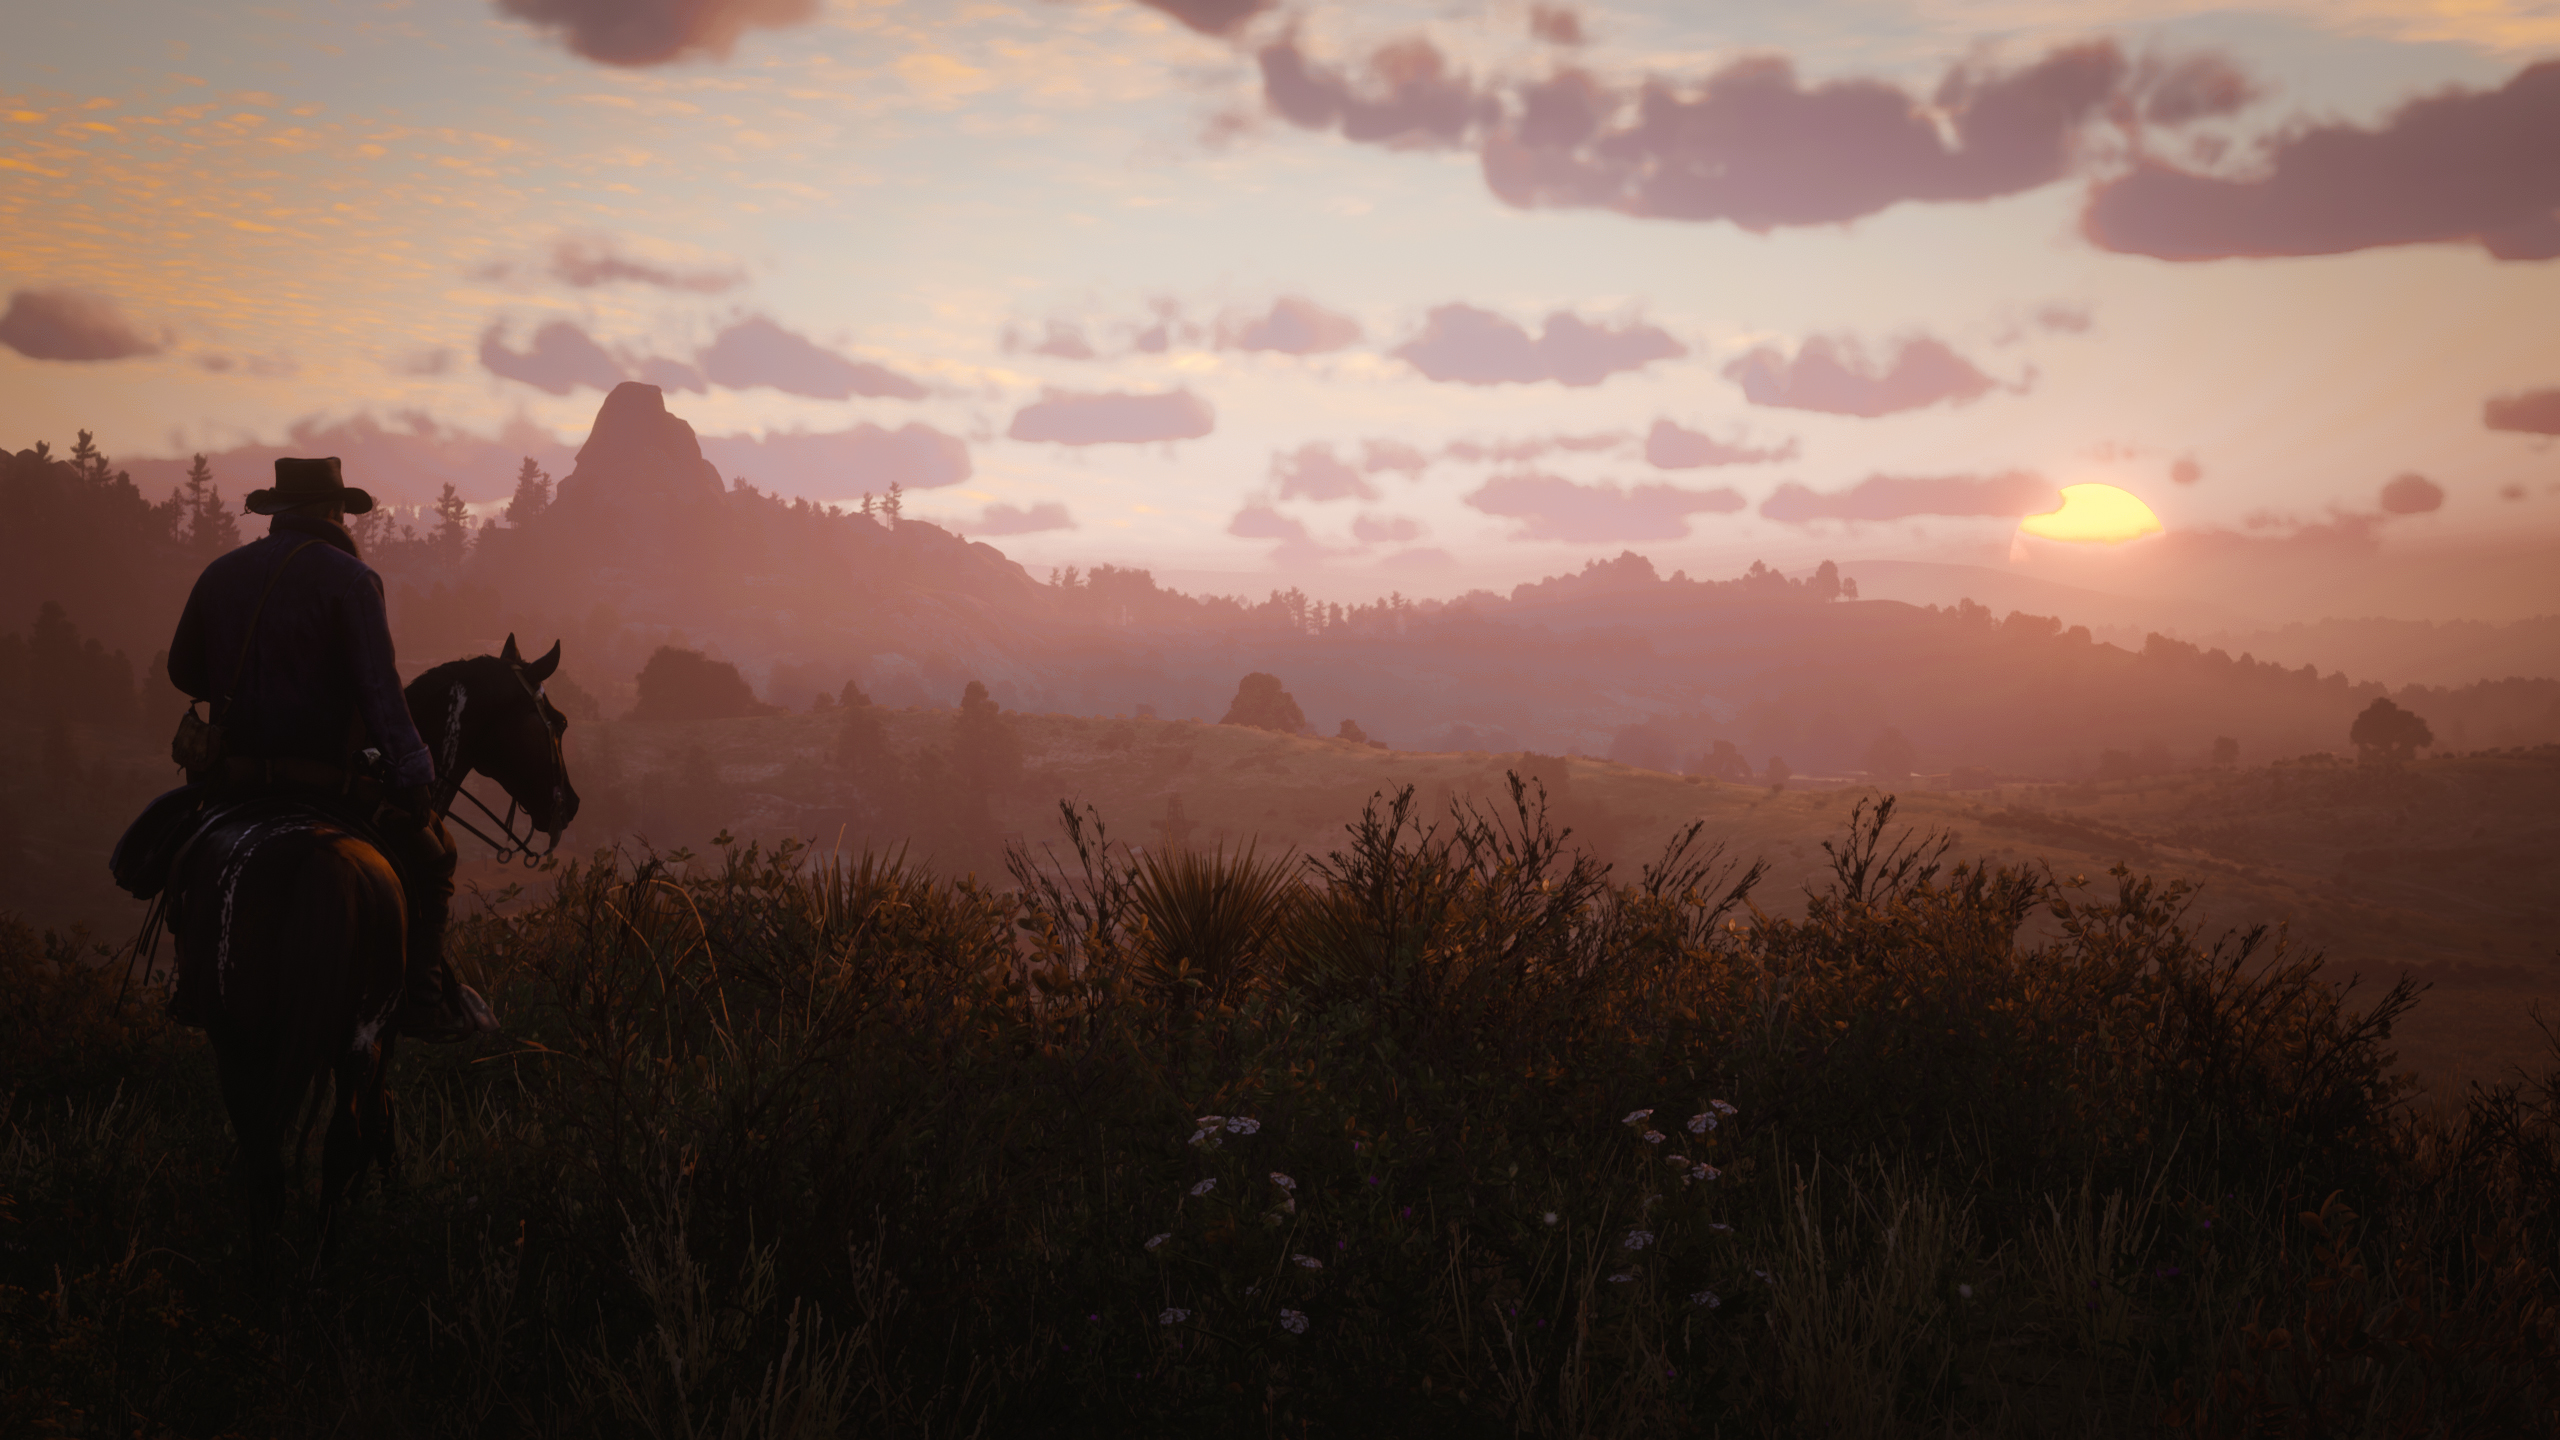 General 2560x1440 game photography Red Dead Redemption 2 Rockstar Games horse animals cowboy PC gaming video games video game characters CGI video game art screen shot sunset sunset glow mountains clouds sky Sun horseback grass cowboy hats